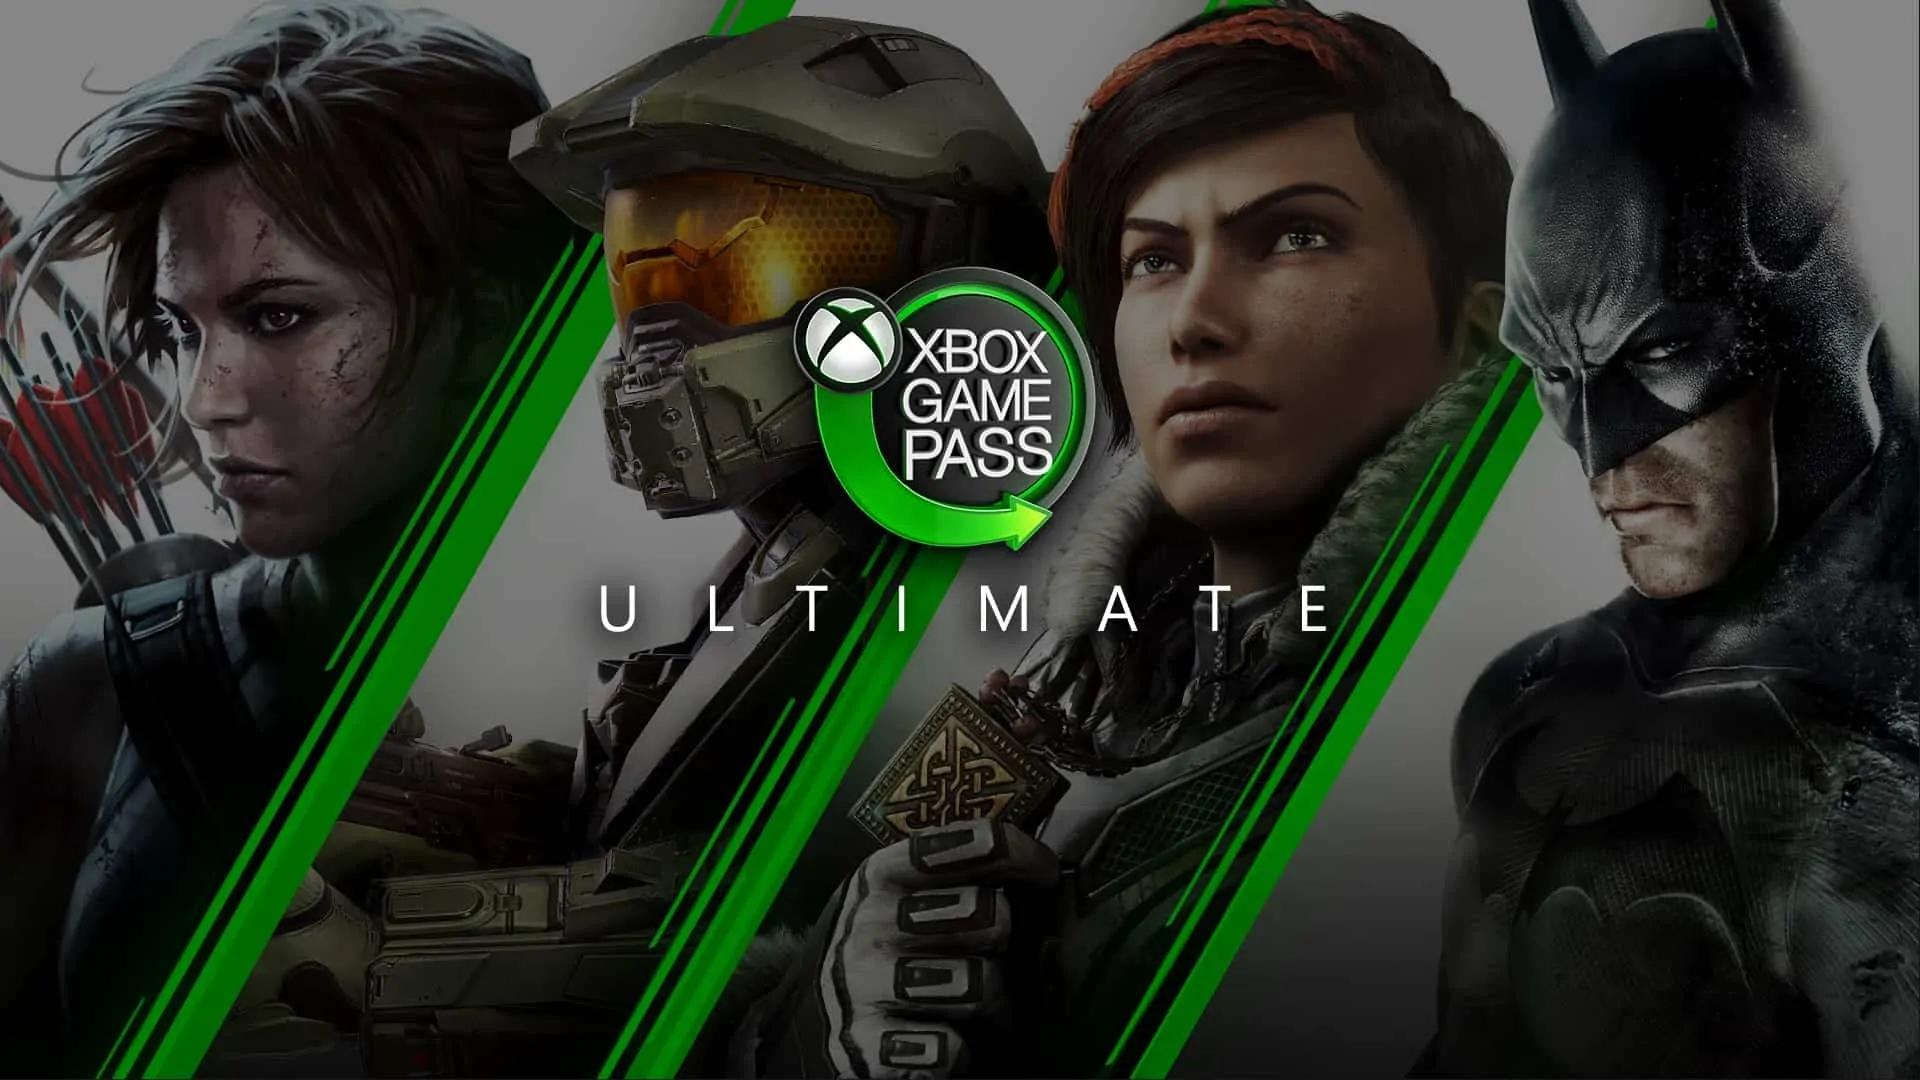 XBOX GAME PASS ULTIMATE 6 months activation keys